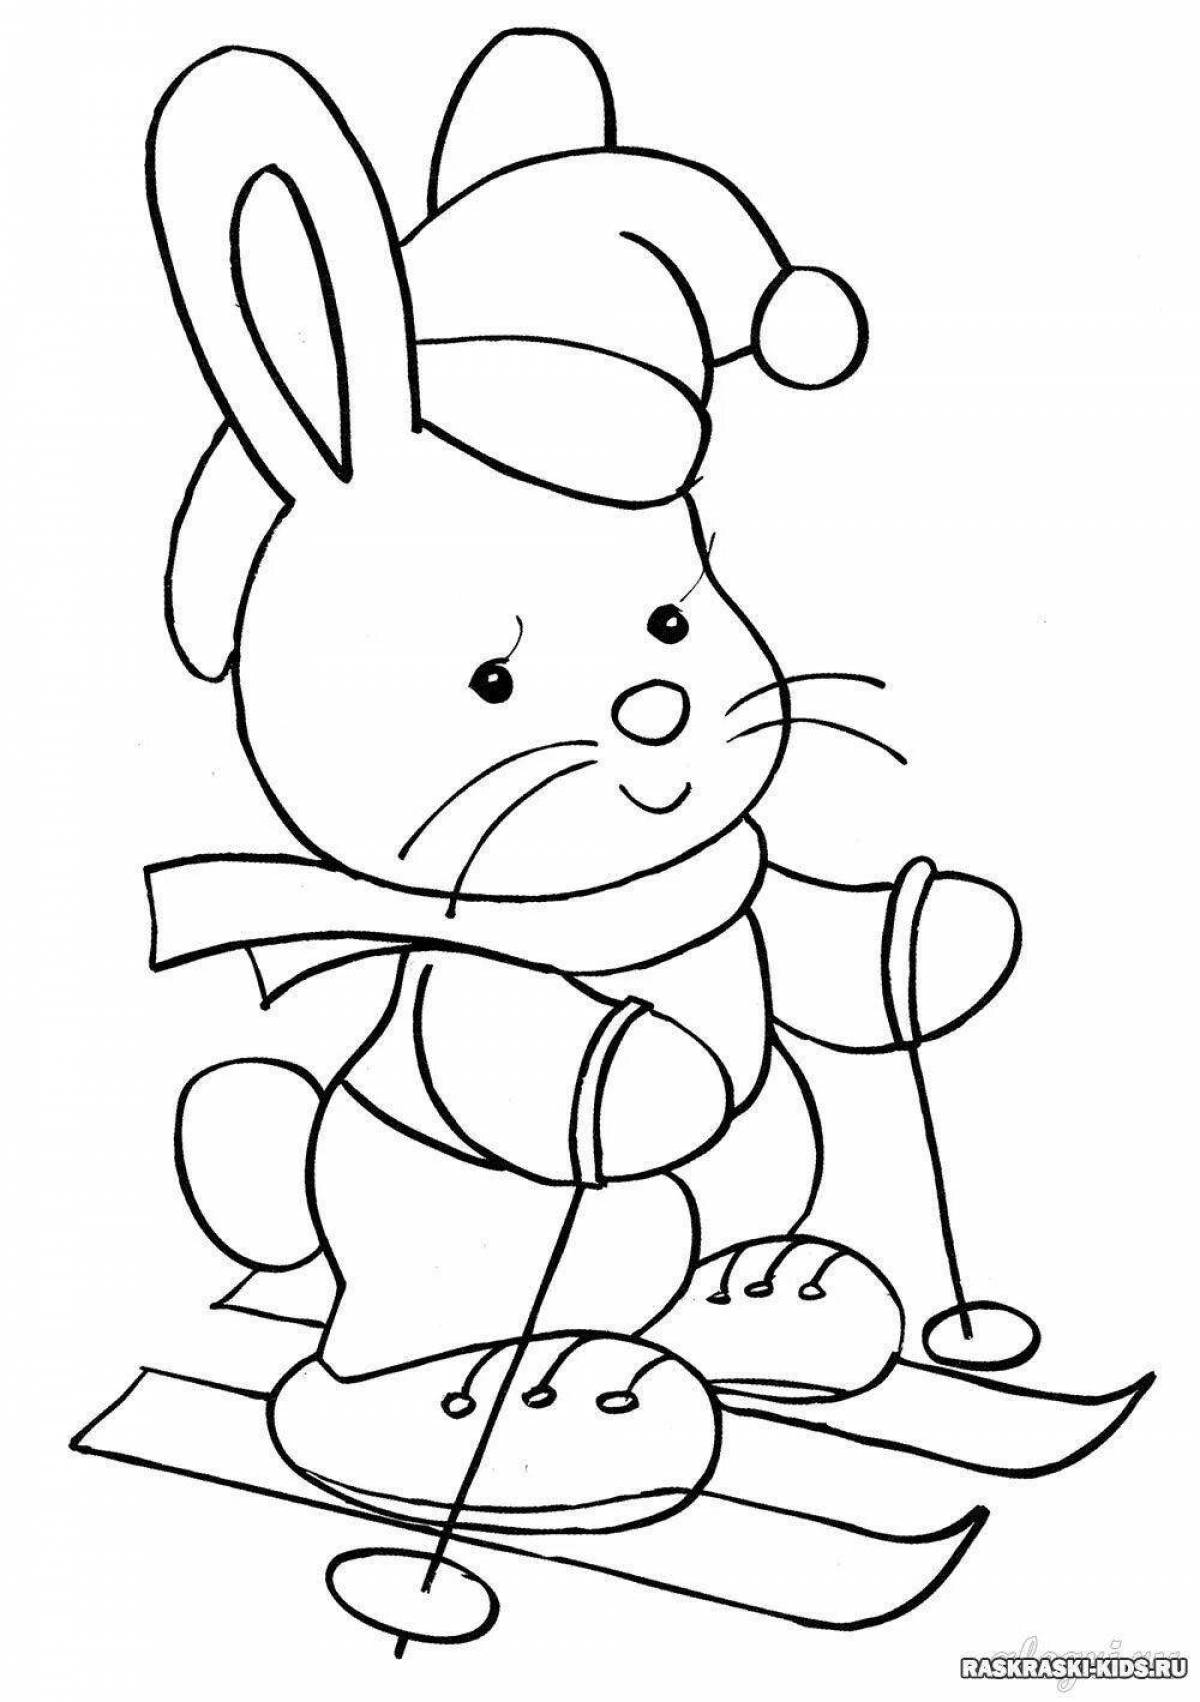 A fun winter coloring book for 3-4 year olds